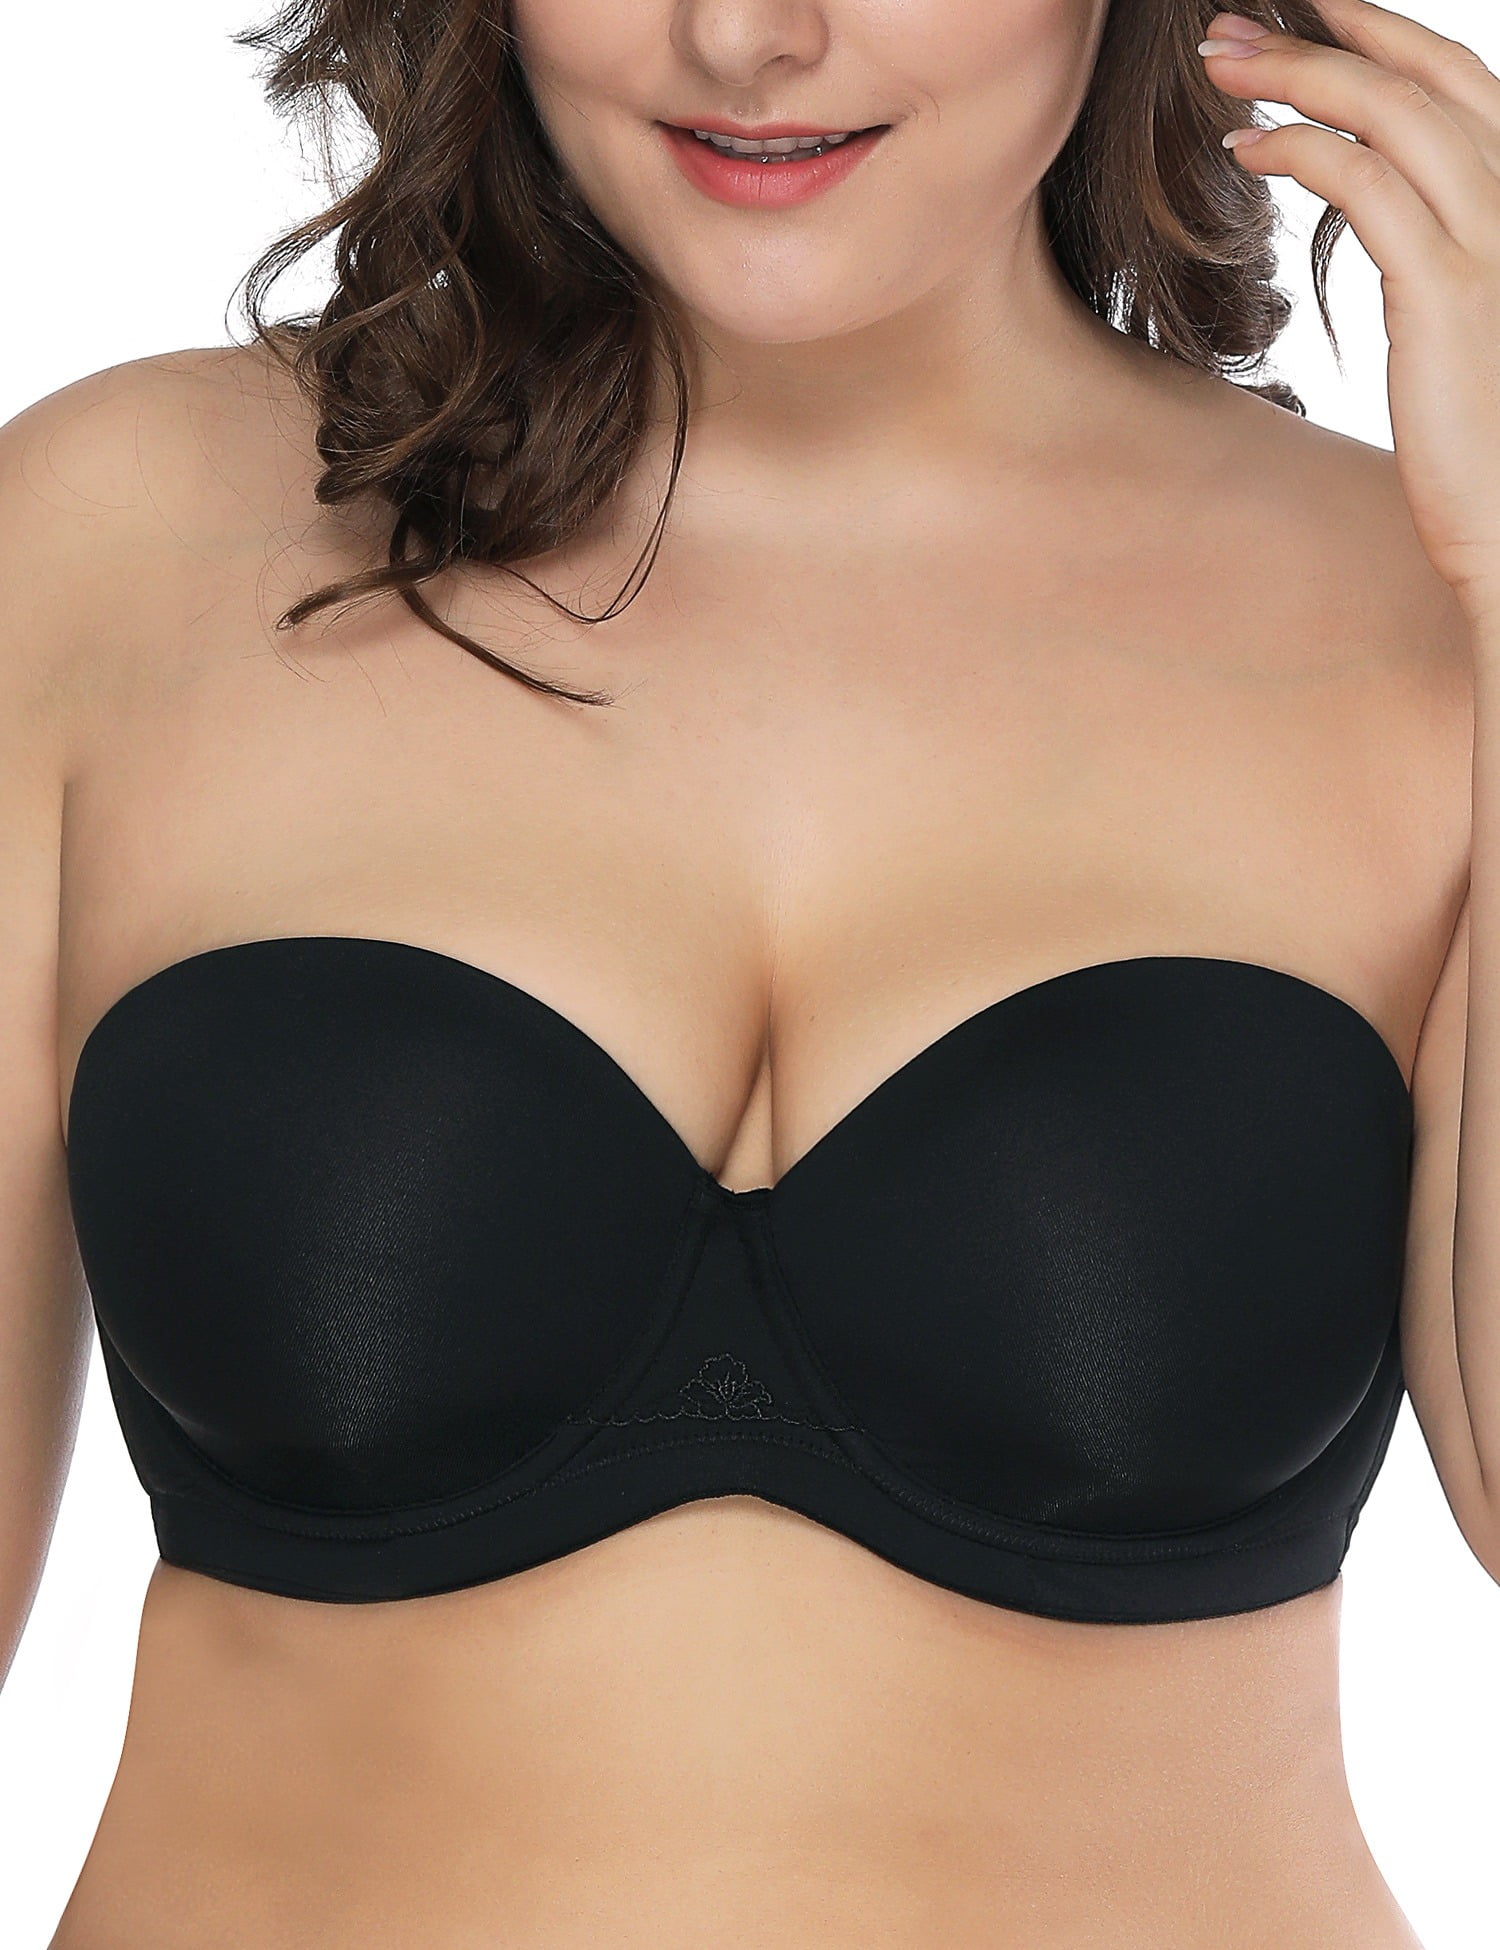 ButtonMode Padded Bra Cup Inserts, Instant Push Up Size Up